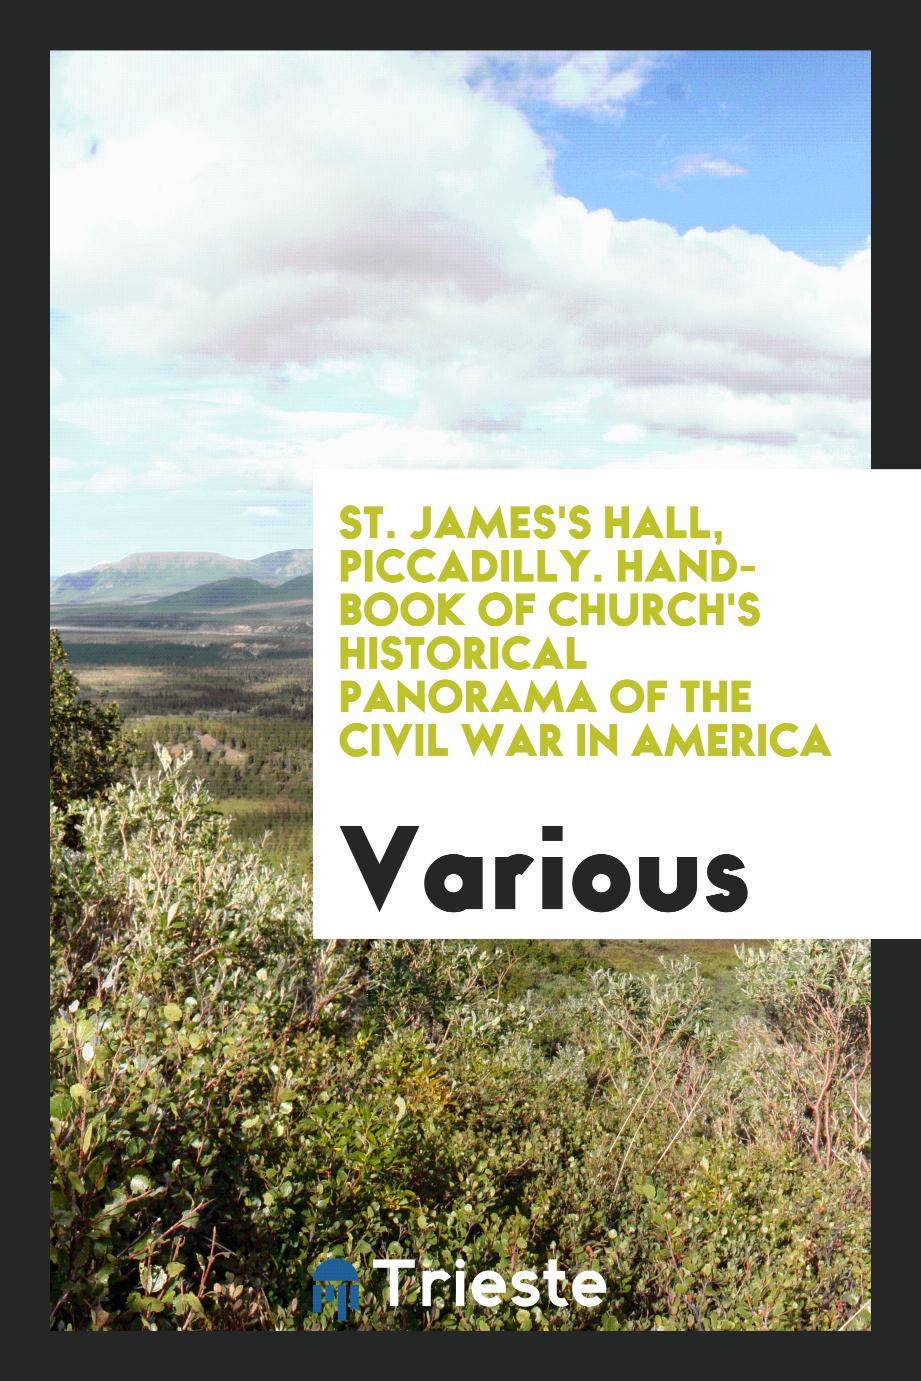 St. James's Hall, Piccadilly. Hand-Book of Church's Historical Panorama of the Civil War in America